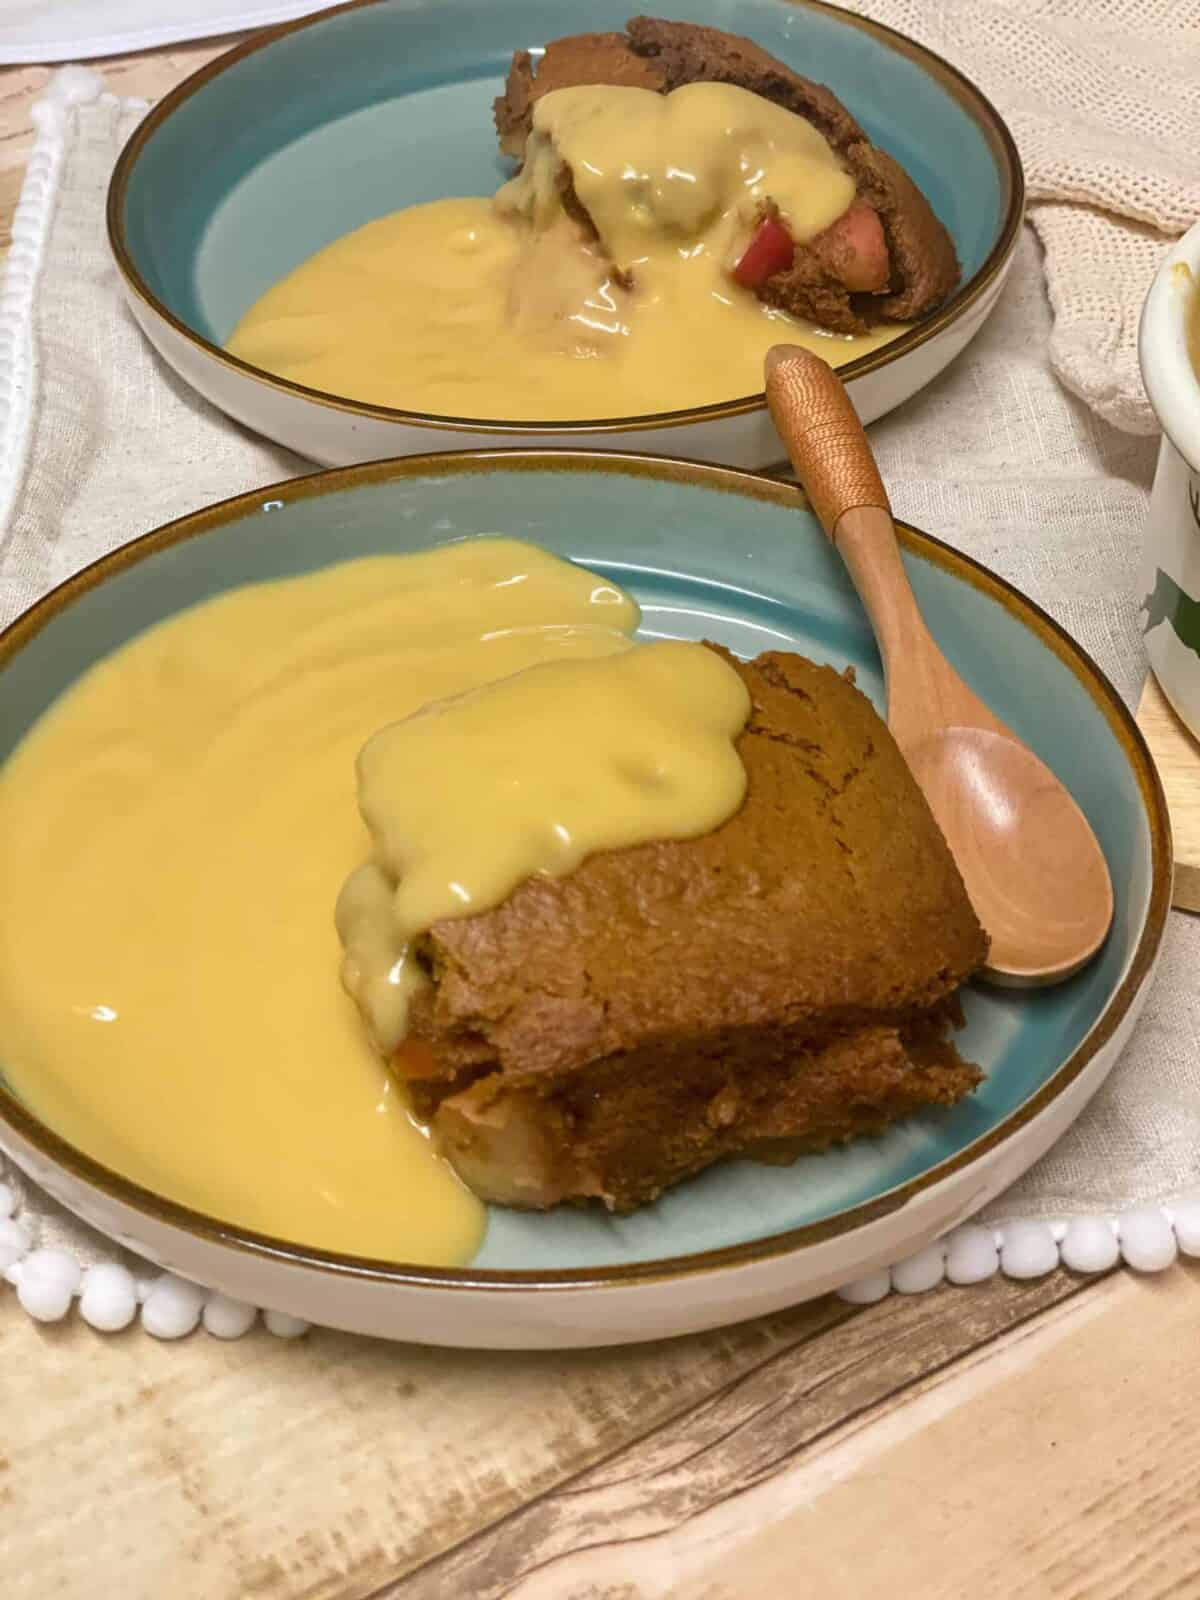 Vegan Eve's pudding served with custard, featured image.